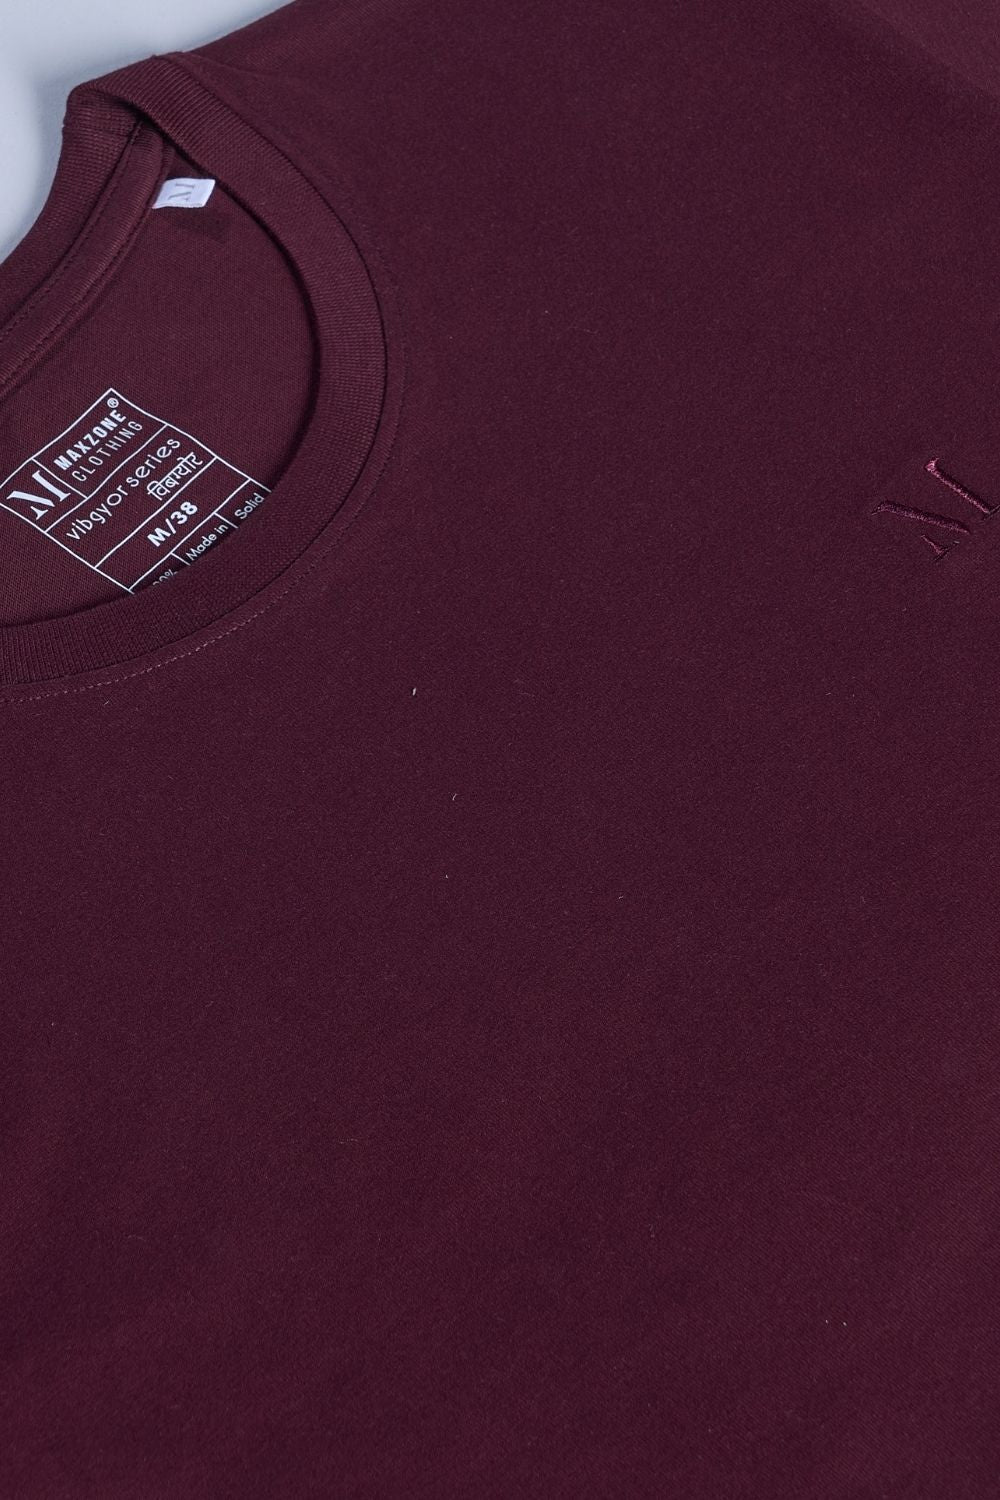 Heng Maroon colored, Solid T shirt for men, with half sleeves and round neck, product close up.